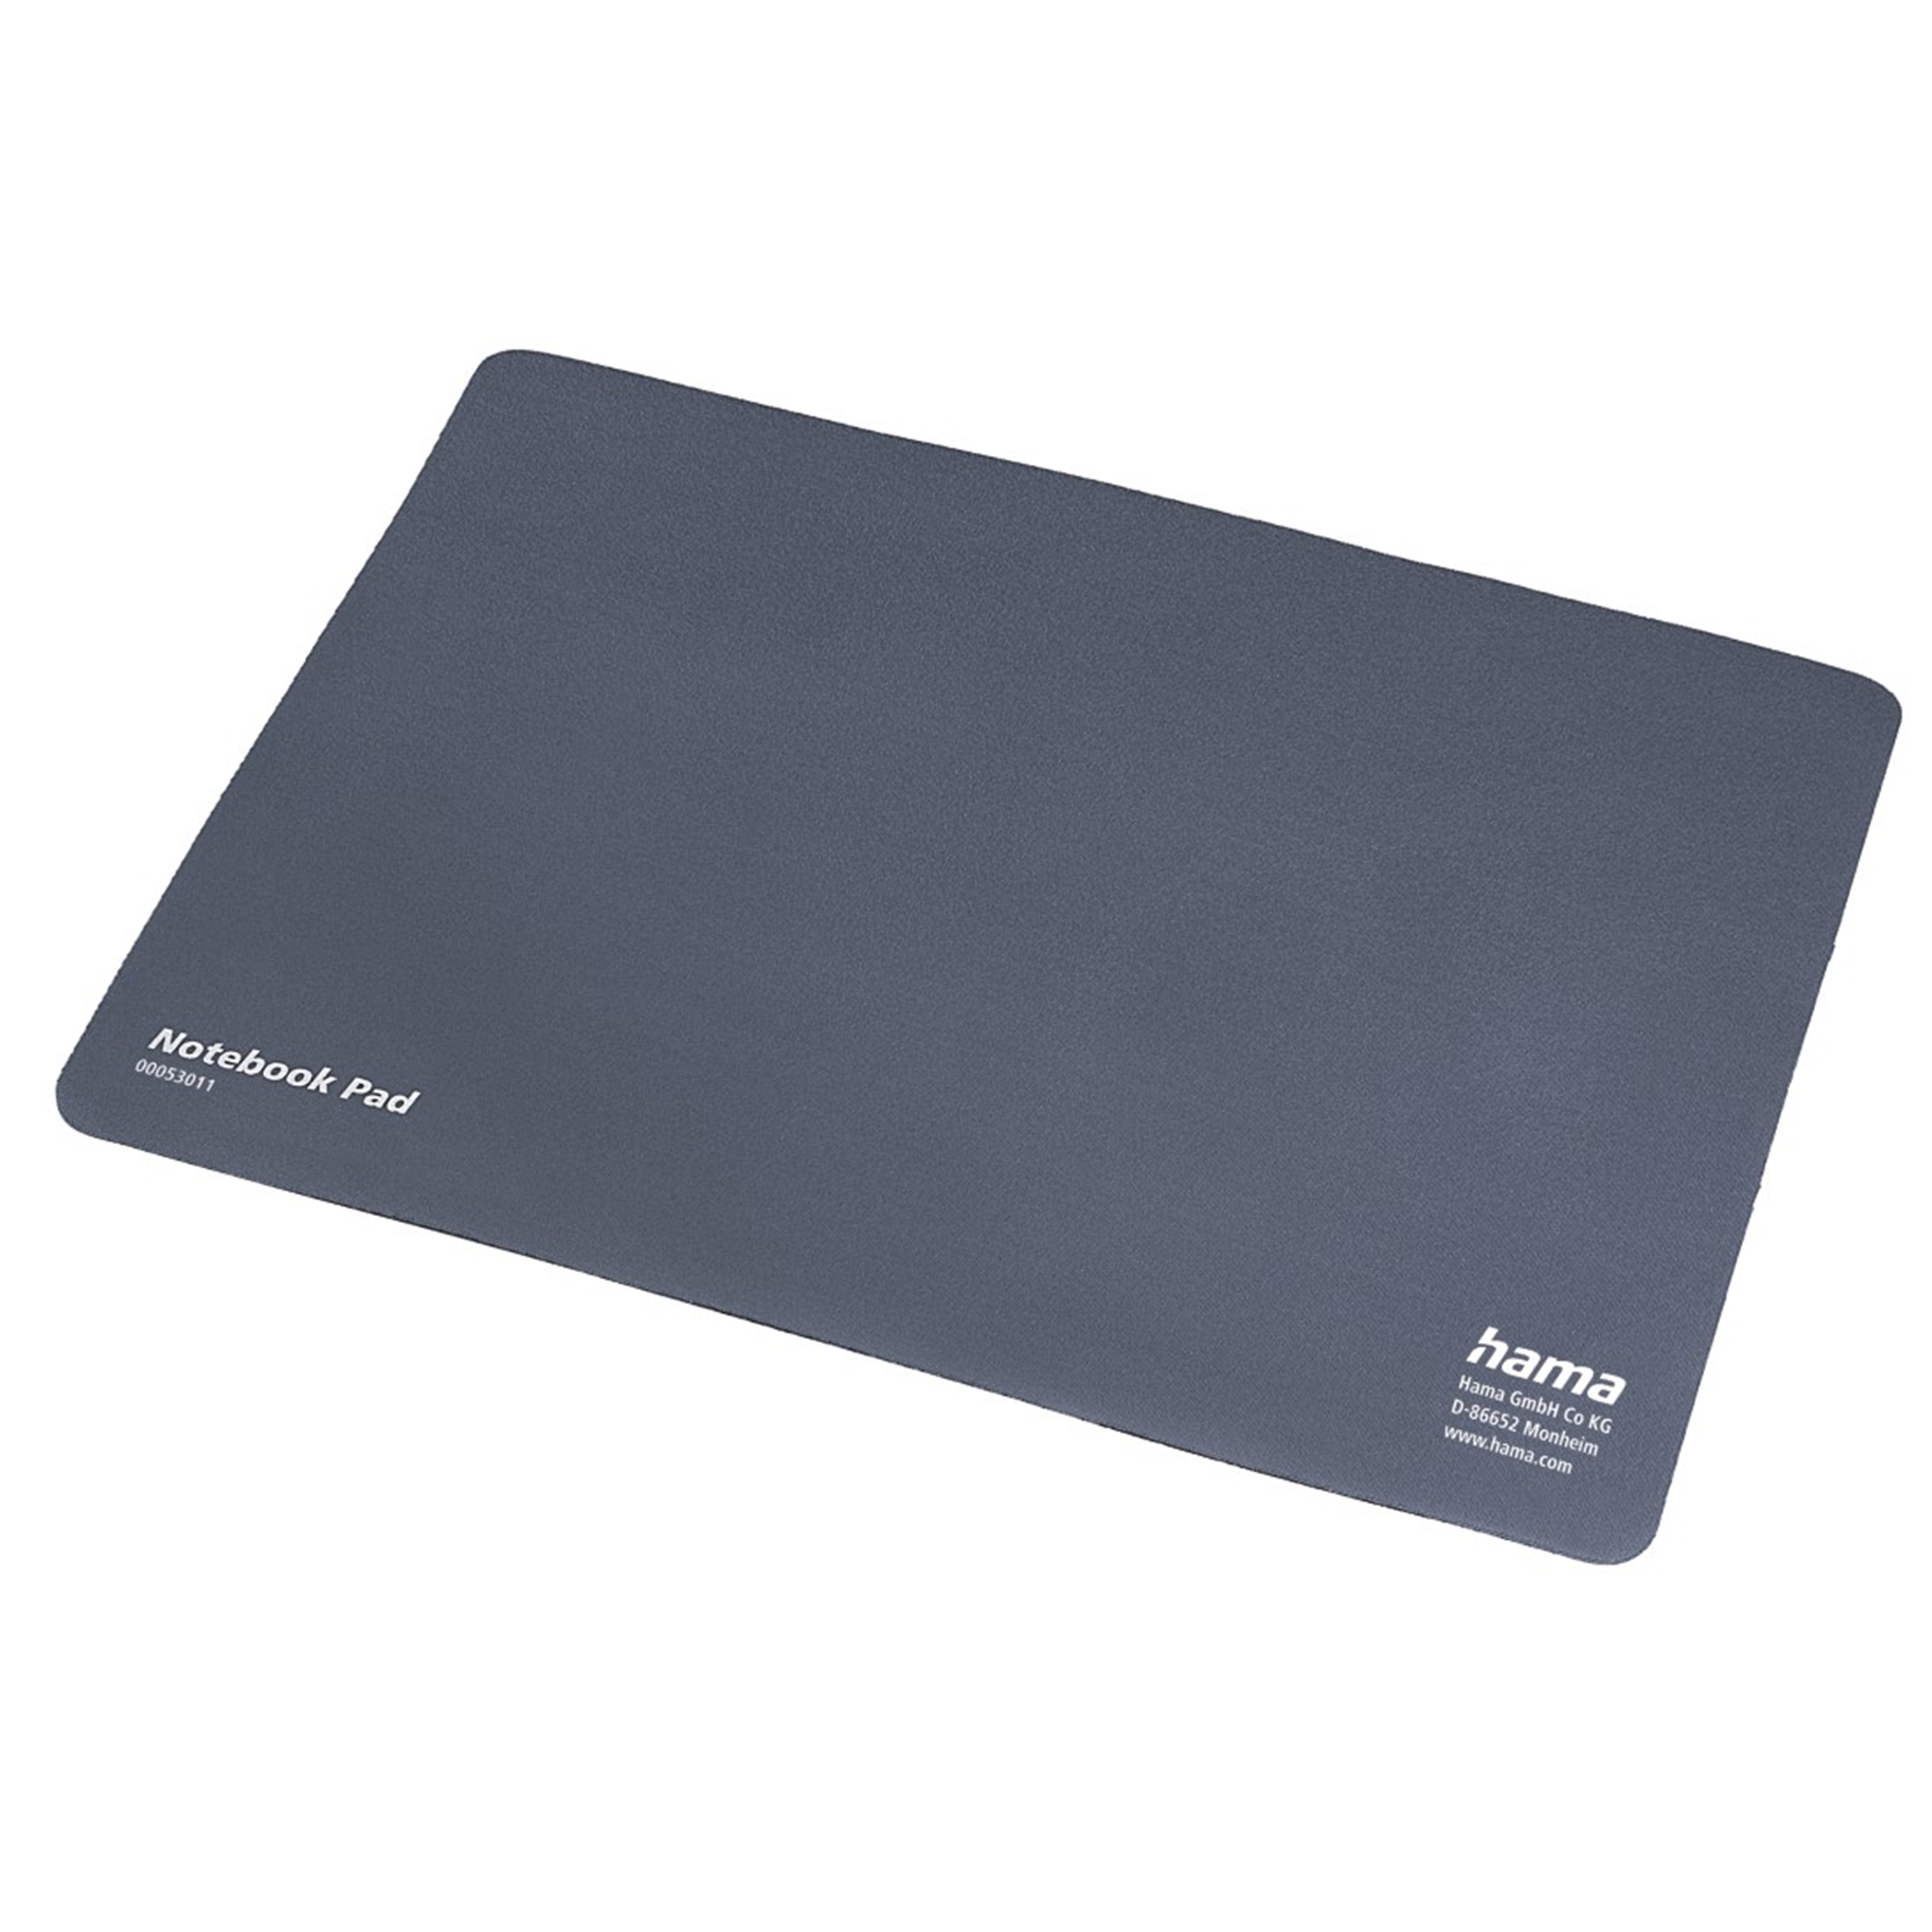 3In1 Notebook-Pad HAMA